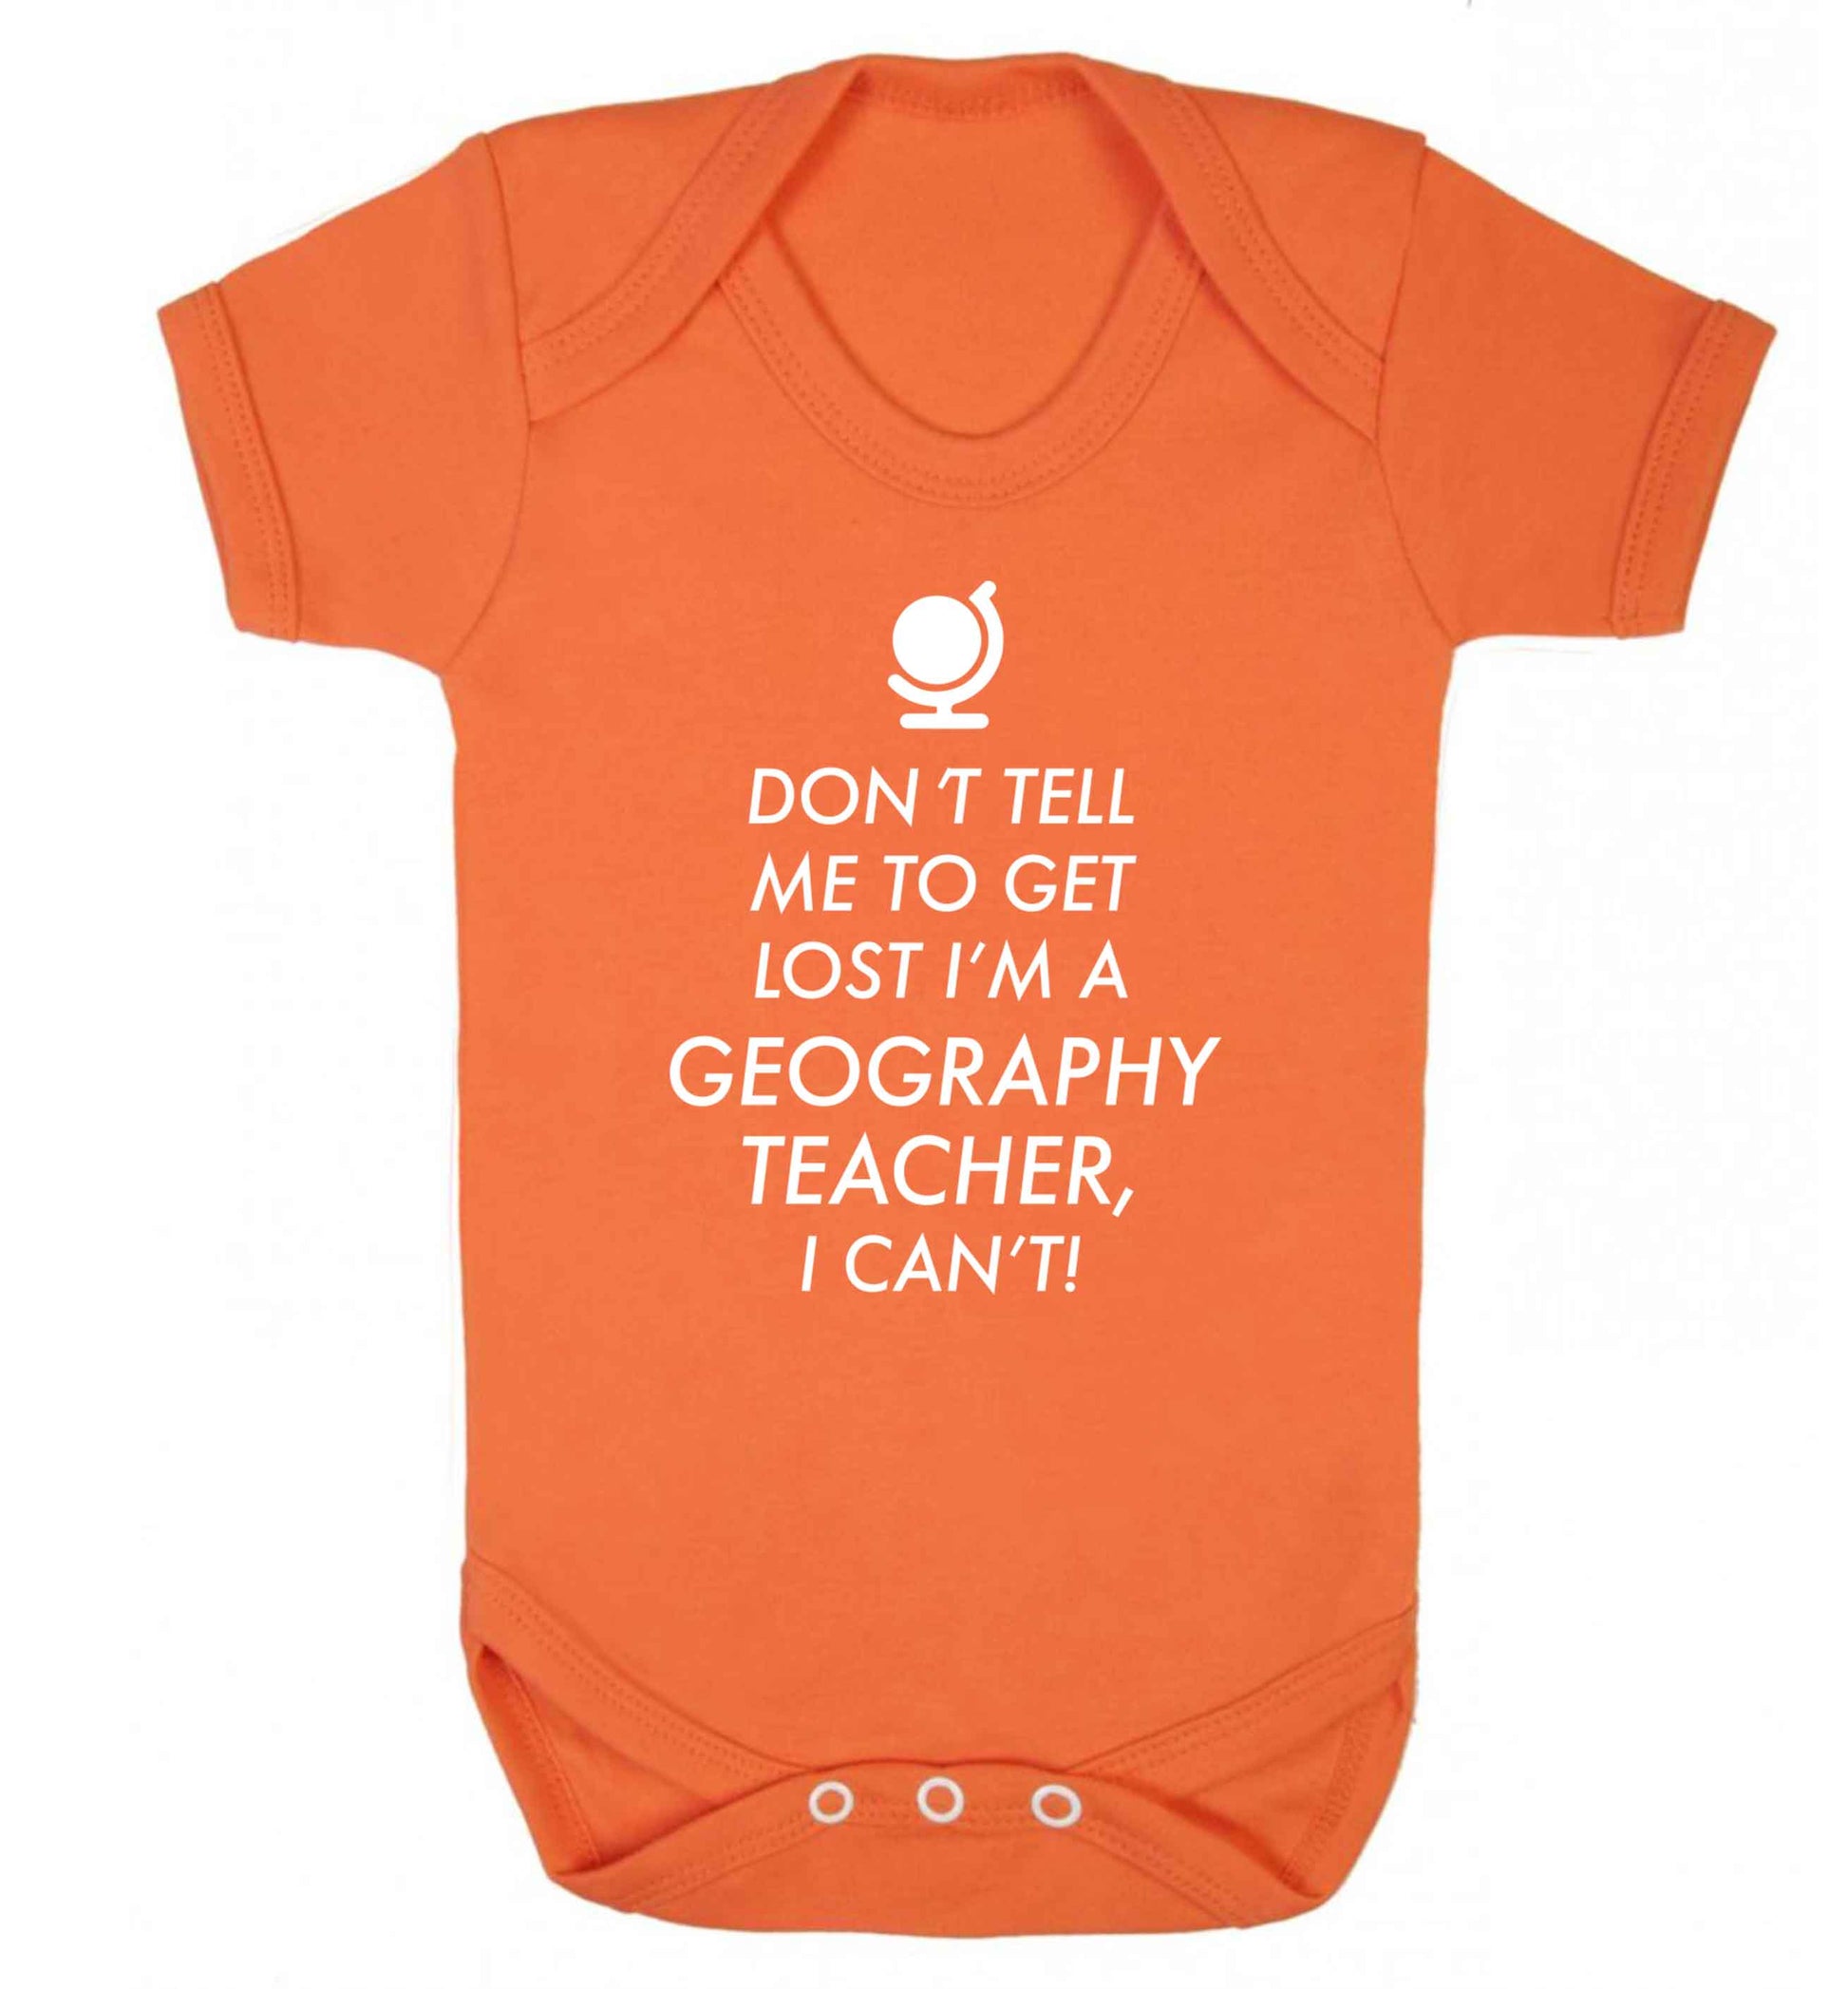 Don't tell me to get lost I'm a geography teacher, I can't Baby Vest orange 18-24 months